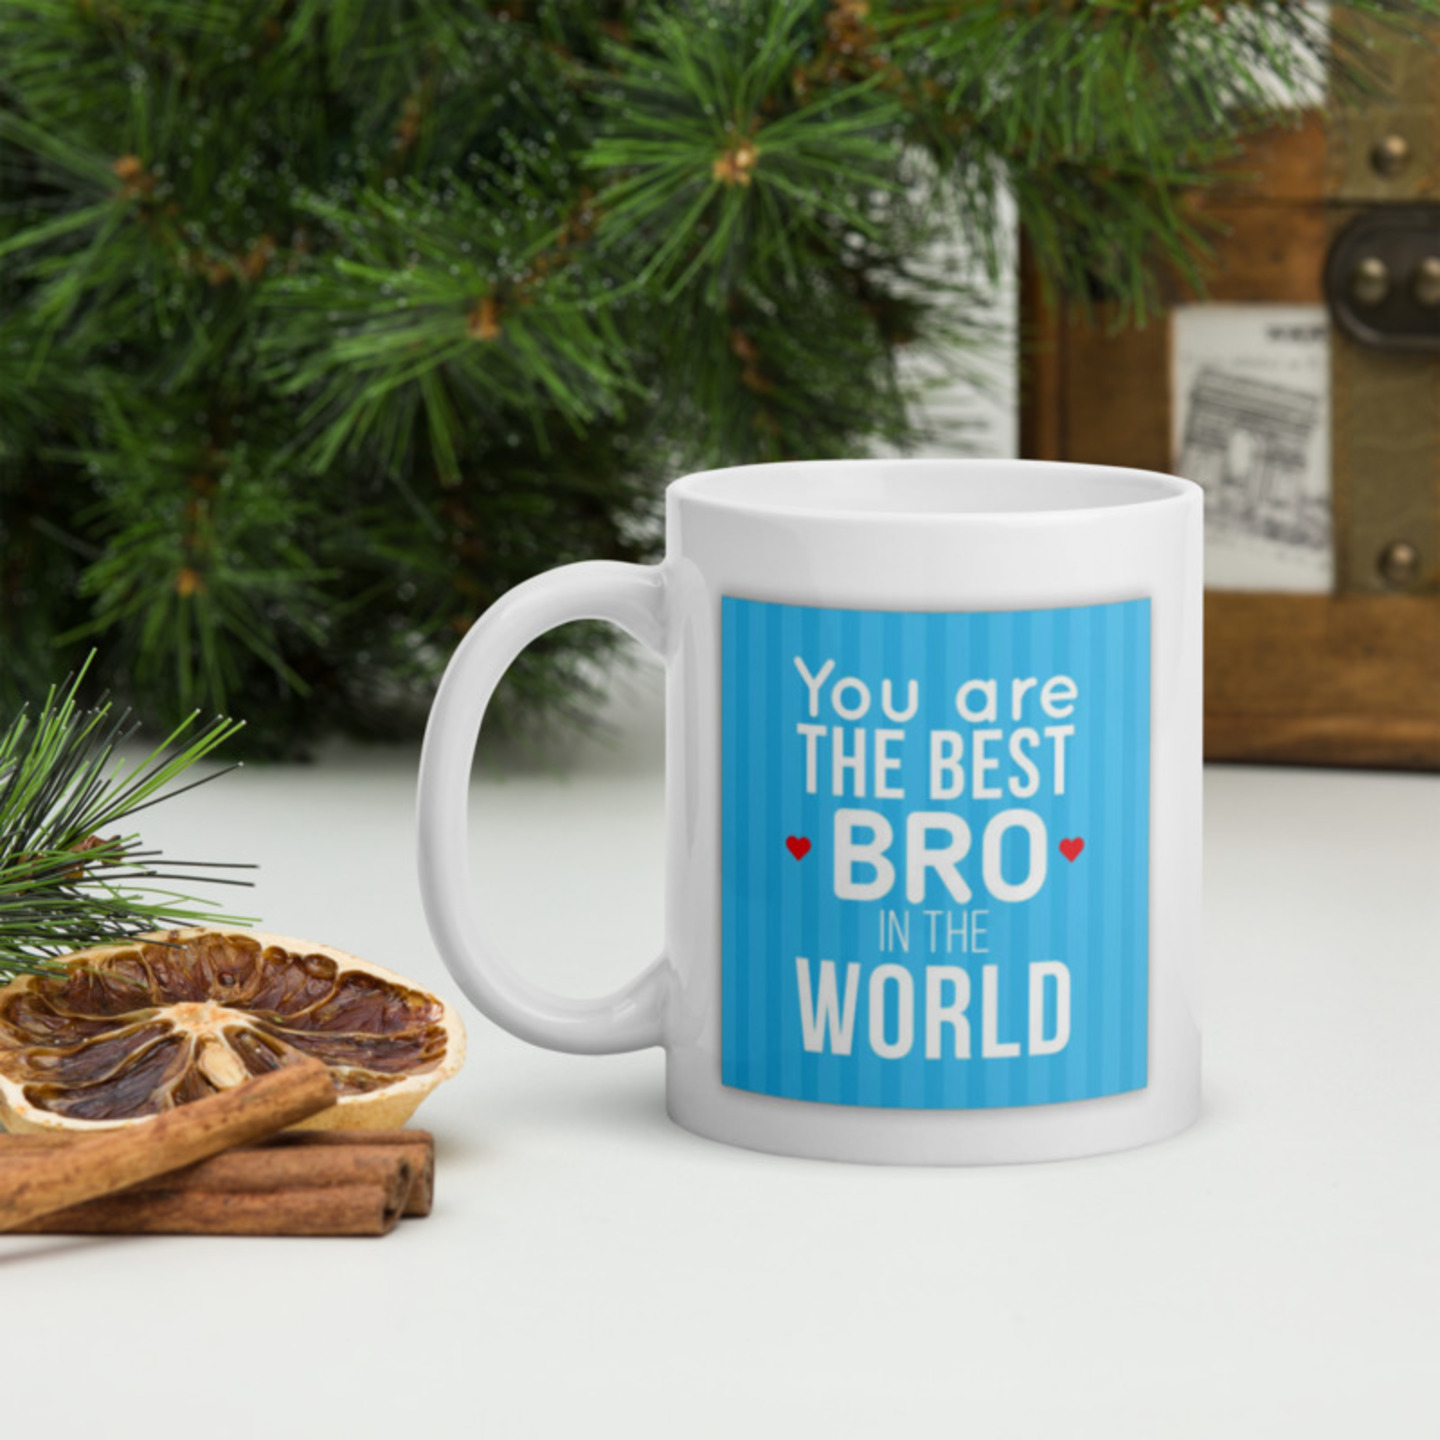 Ceramic Mug - You are the best bro in the world